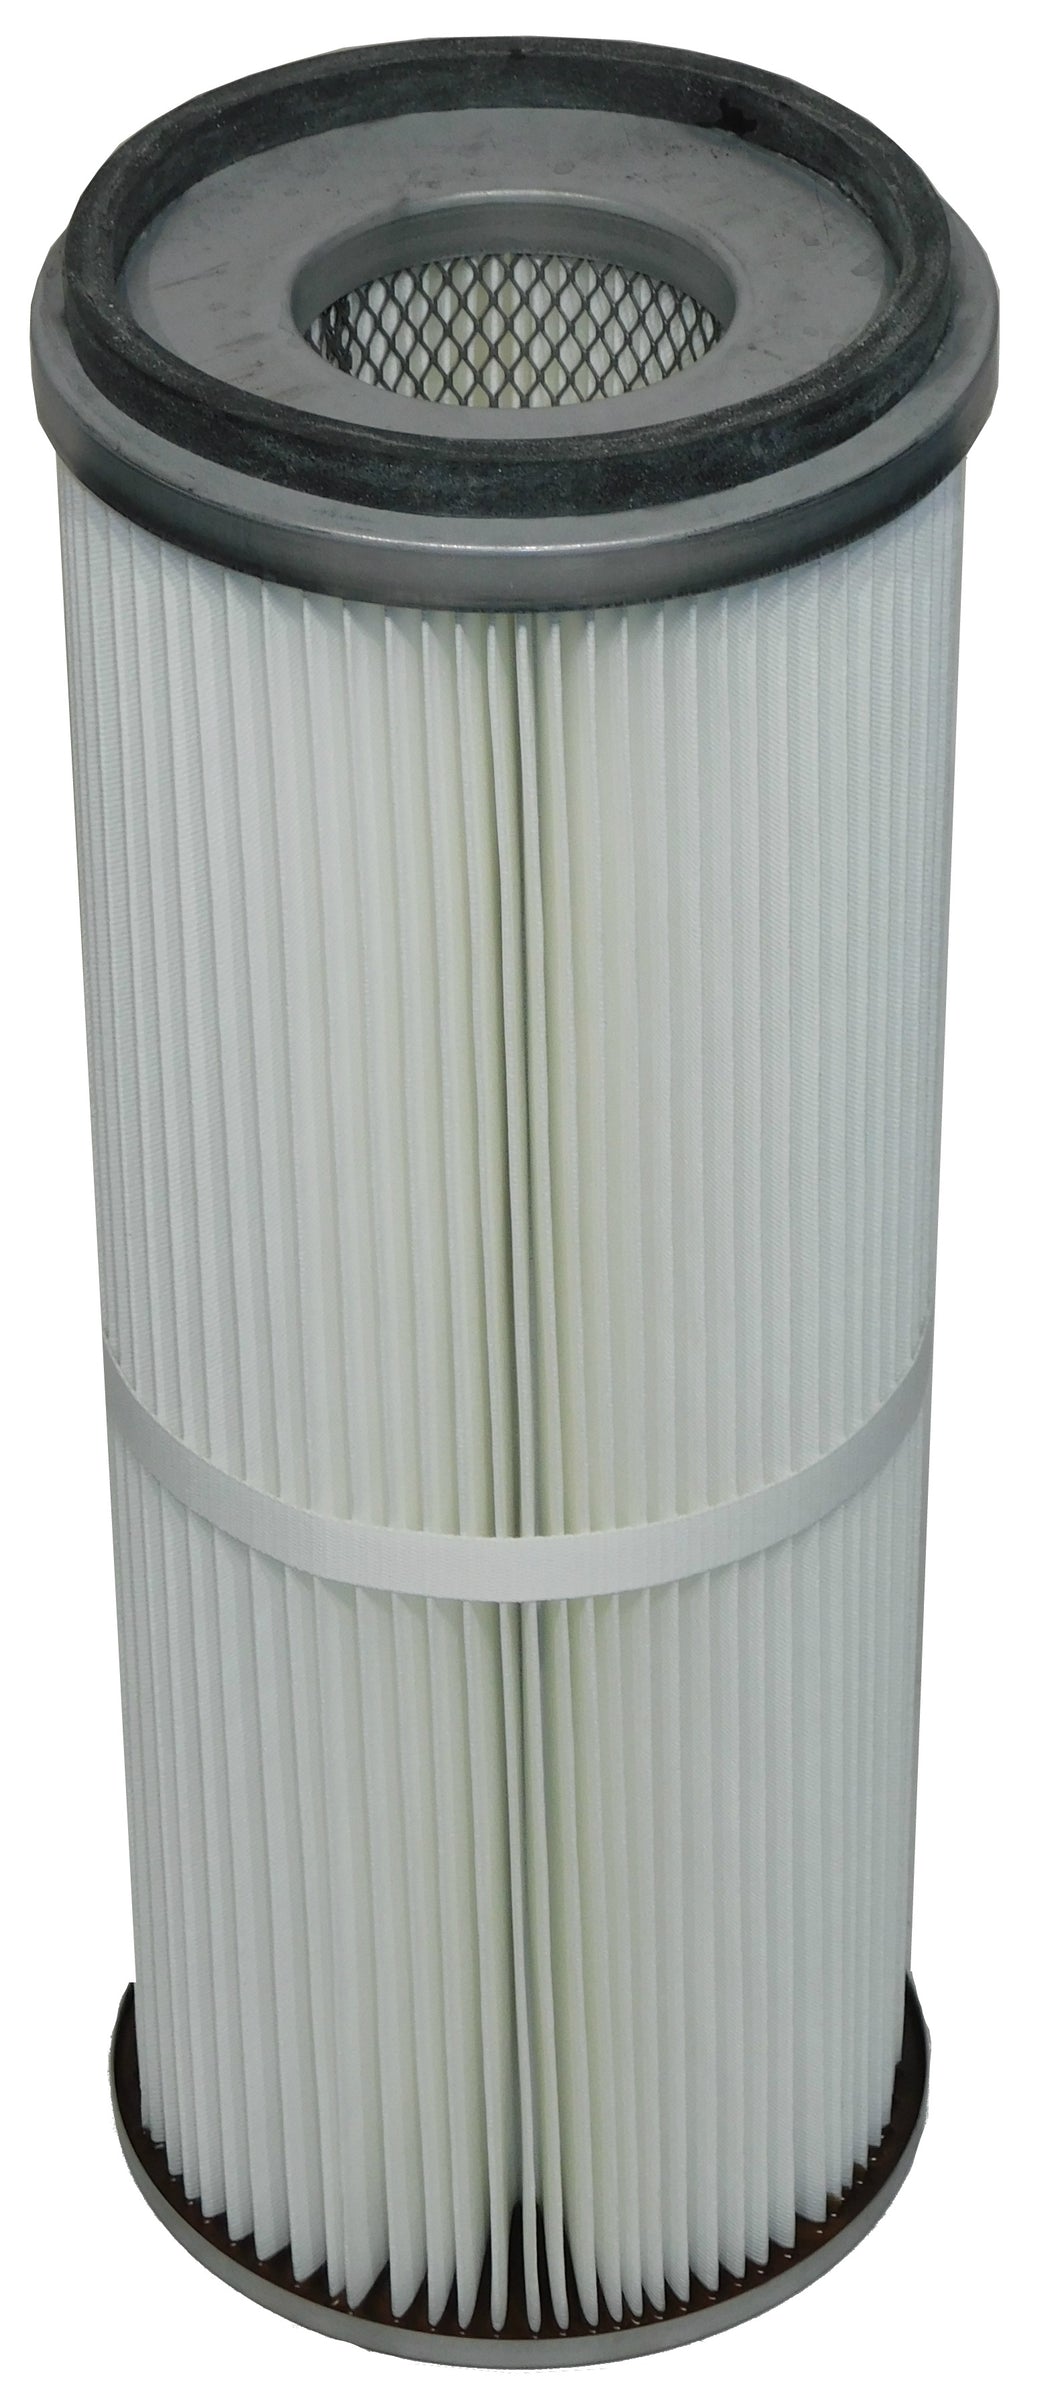 P82-3295 - Donaldson - OEM Replacement Filter